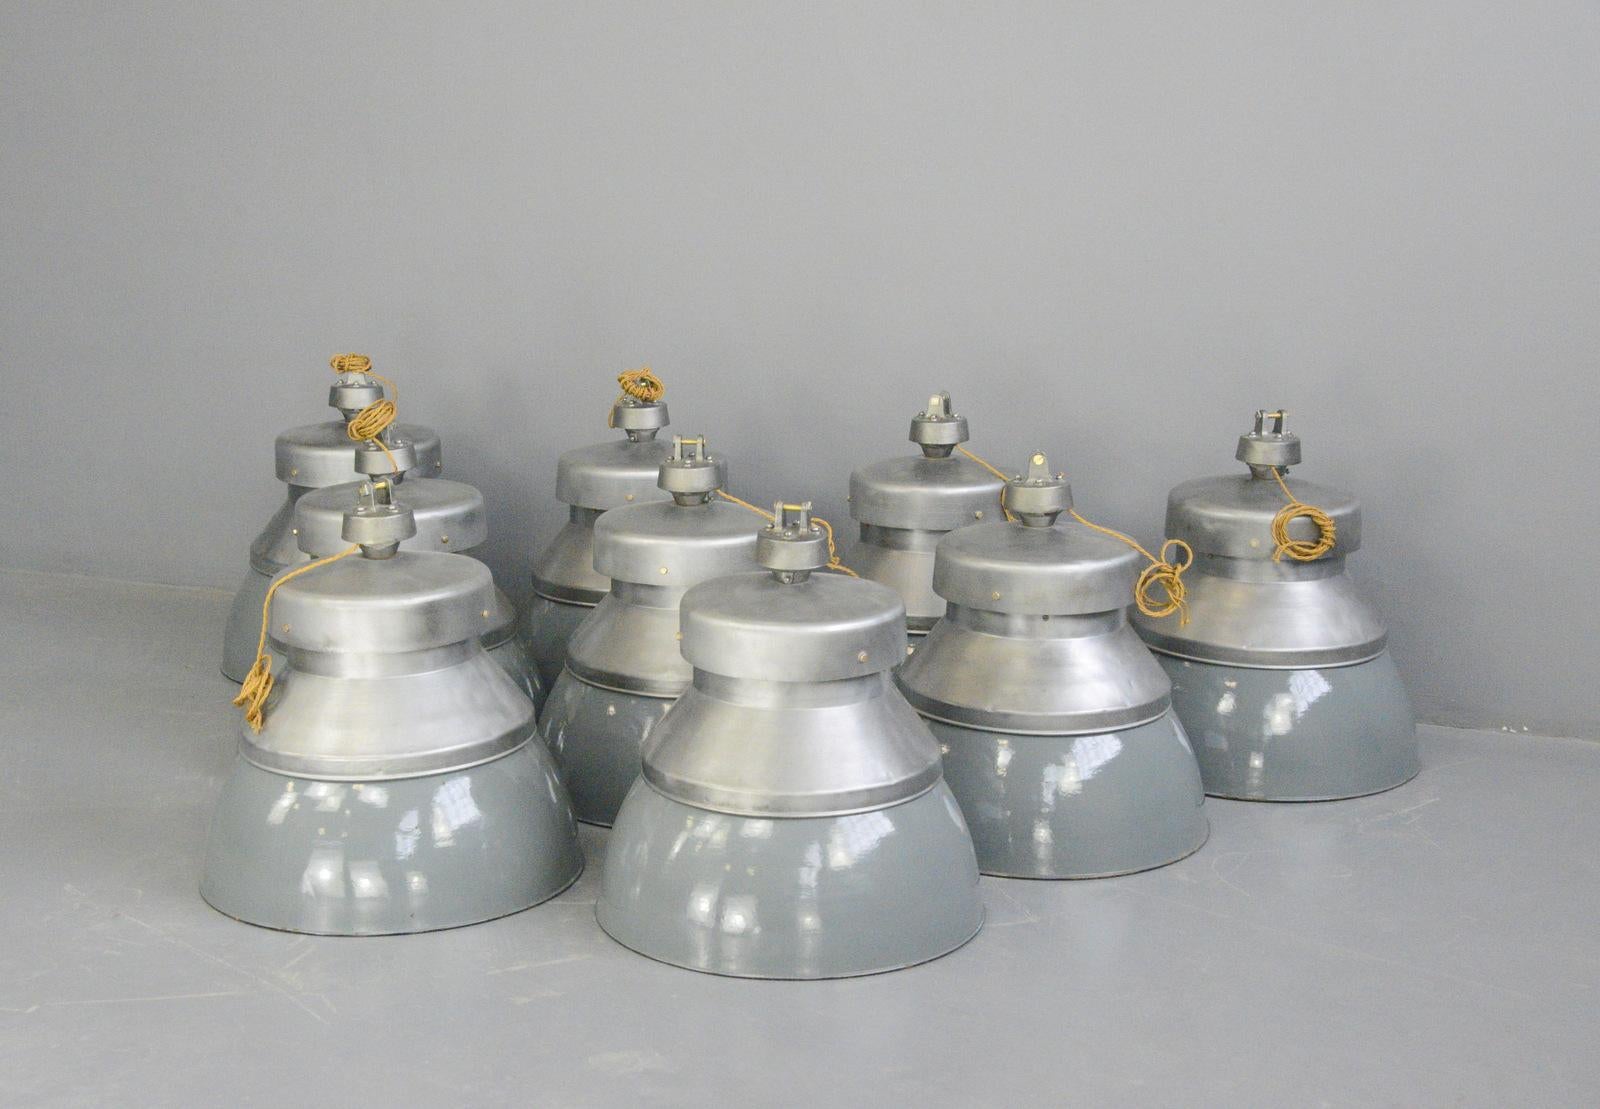 XL factory pendant lights by Kandem circa 1930s

- Price is per light (15 available)
- Vitreous grey enamel shades
- Shades twist off for easy cleaning
- Brushed steel tops with cast iron hanging
- Branded 